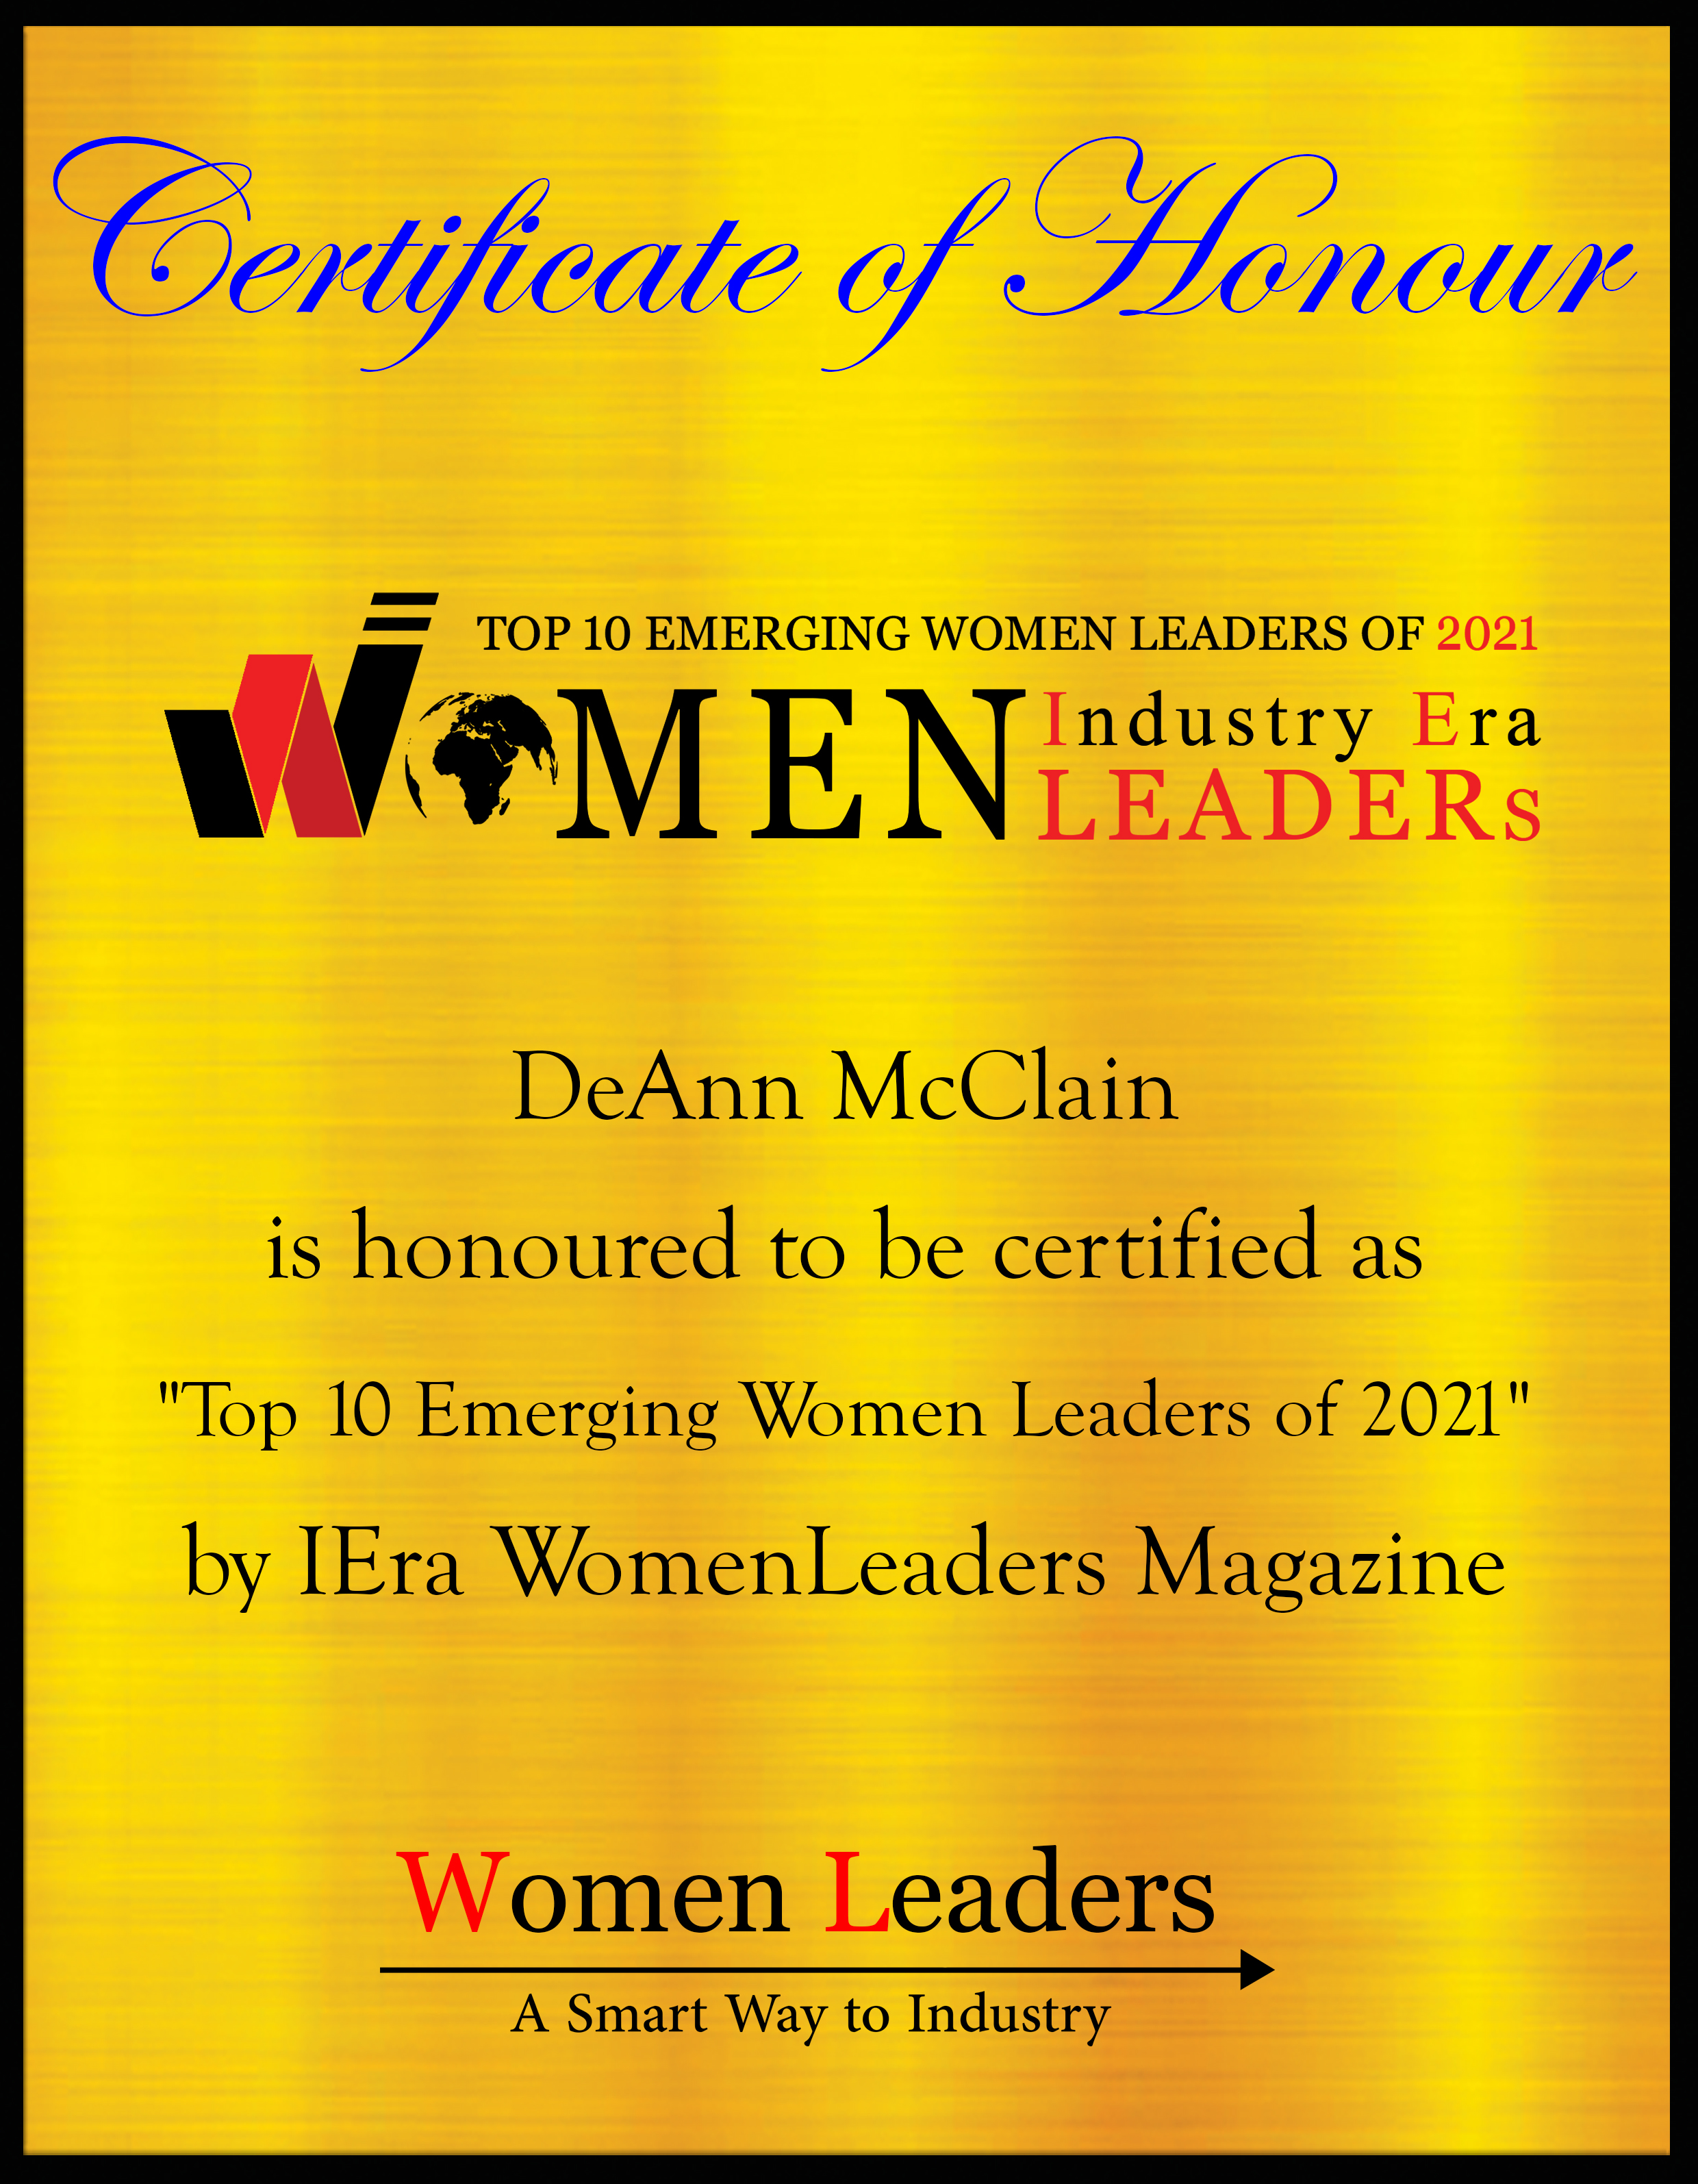 DeAnn McClain, Executive Vice President & COO at Heartland Dental, Most Empowering Women Leaders of 2021